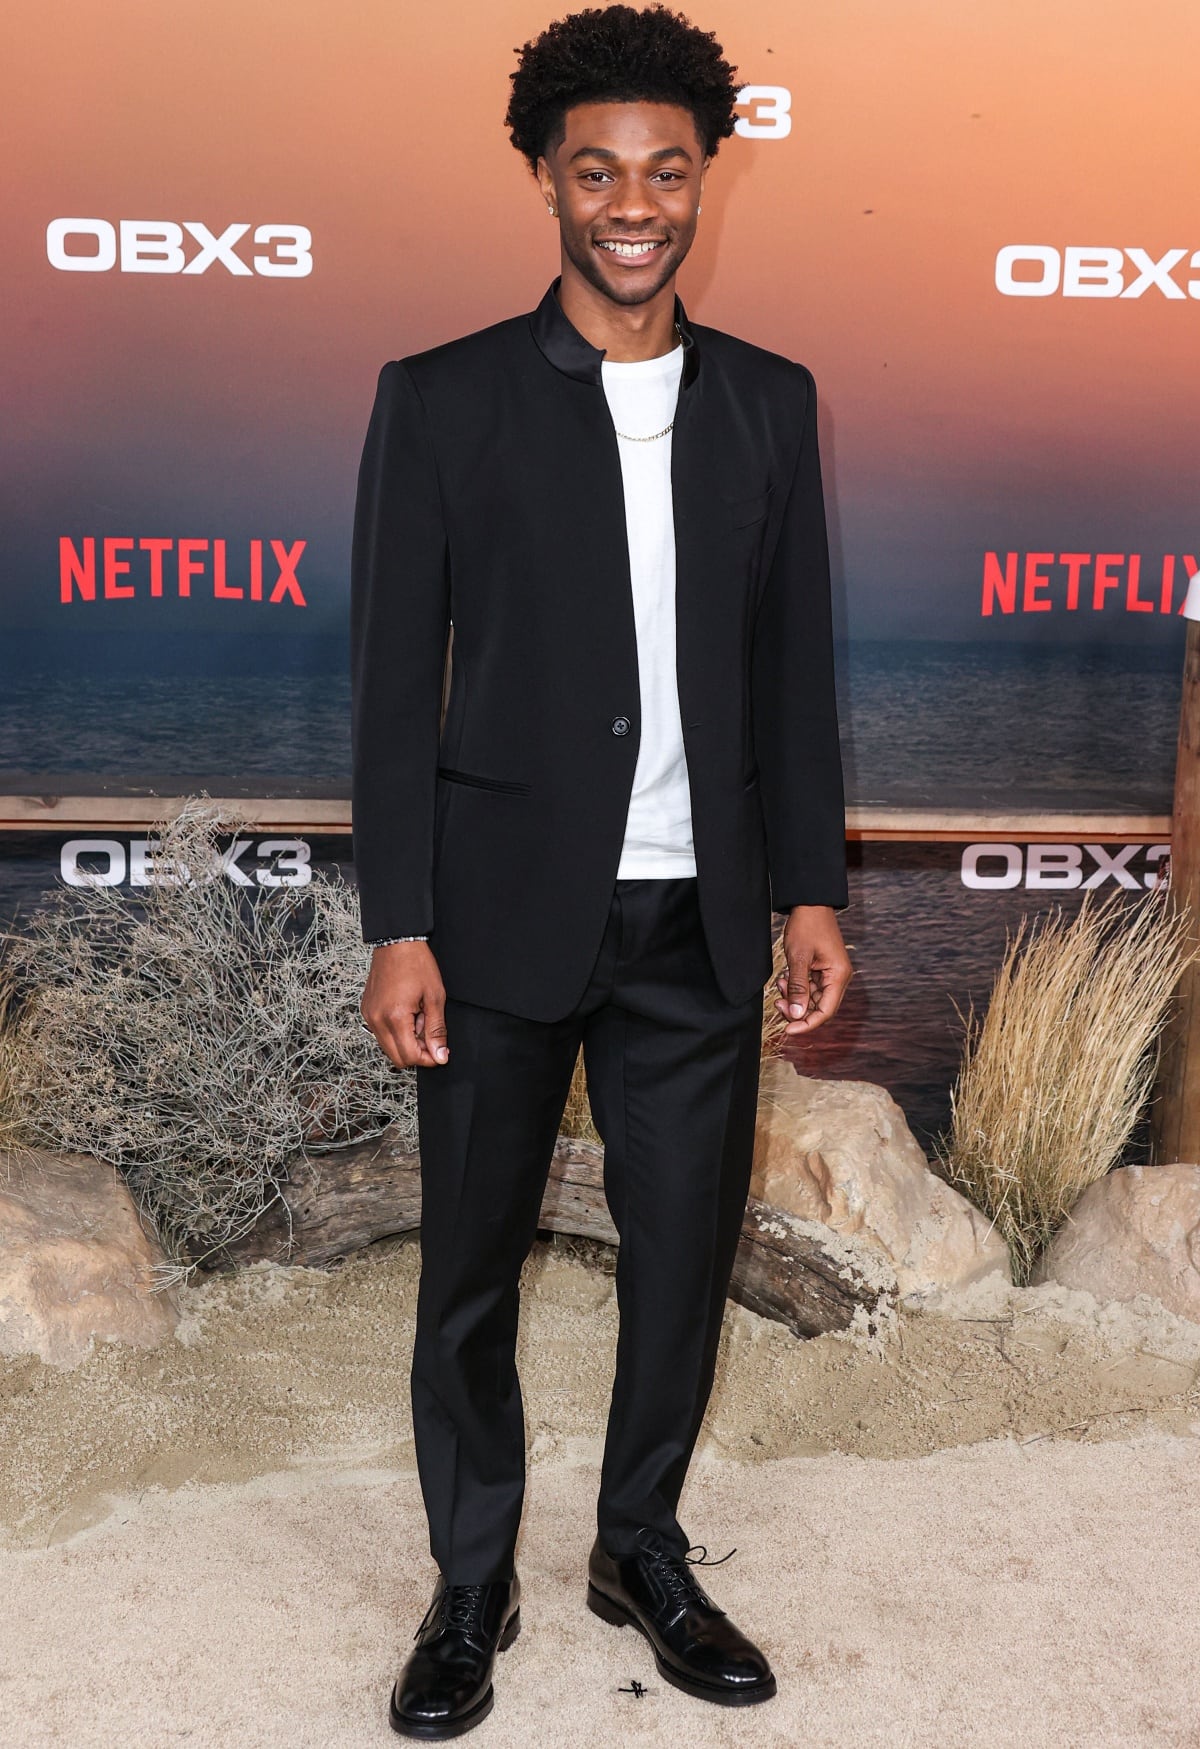 Jonathan Daviss in a smart-casual monochromatic look at the premiere of Netflix’s Outer Banks Season 3